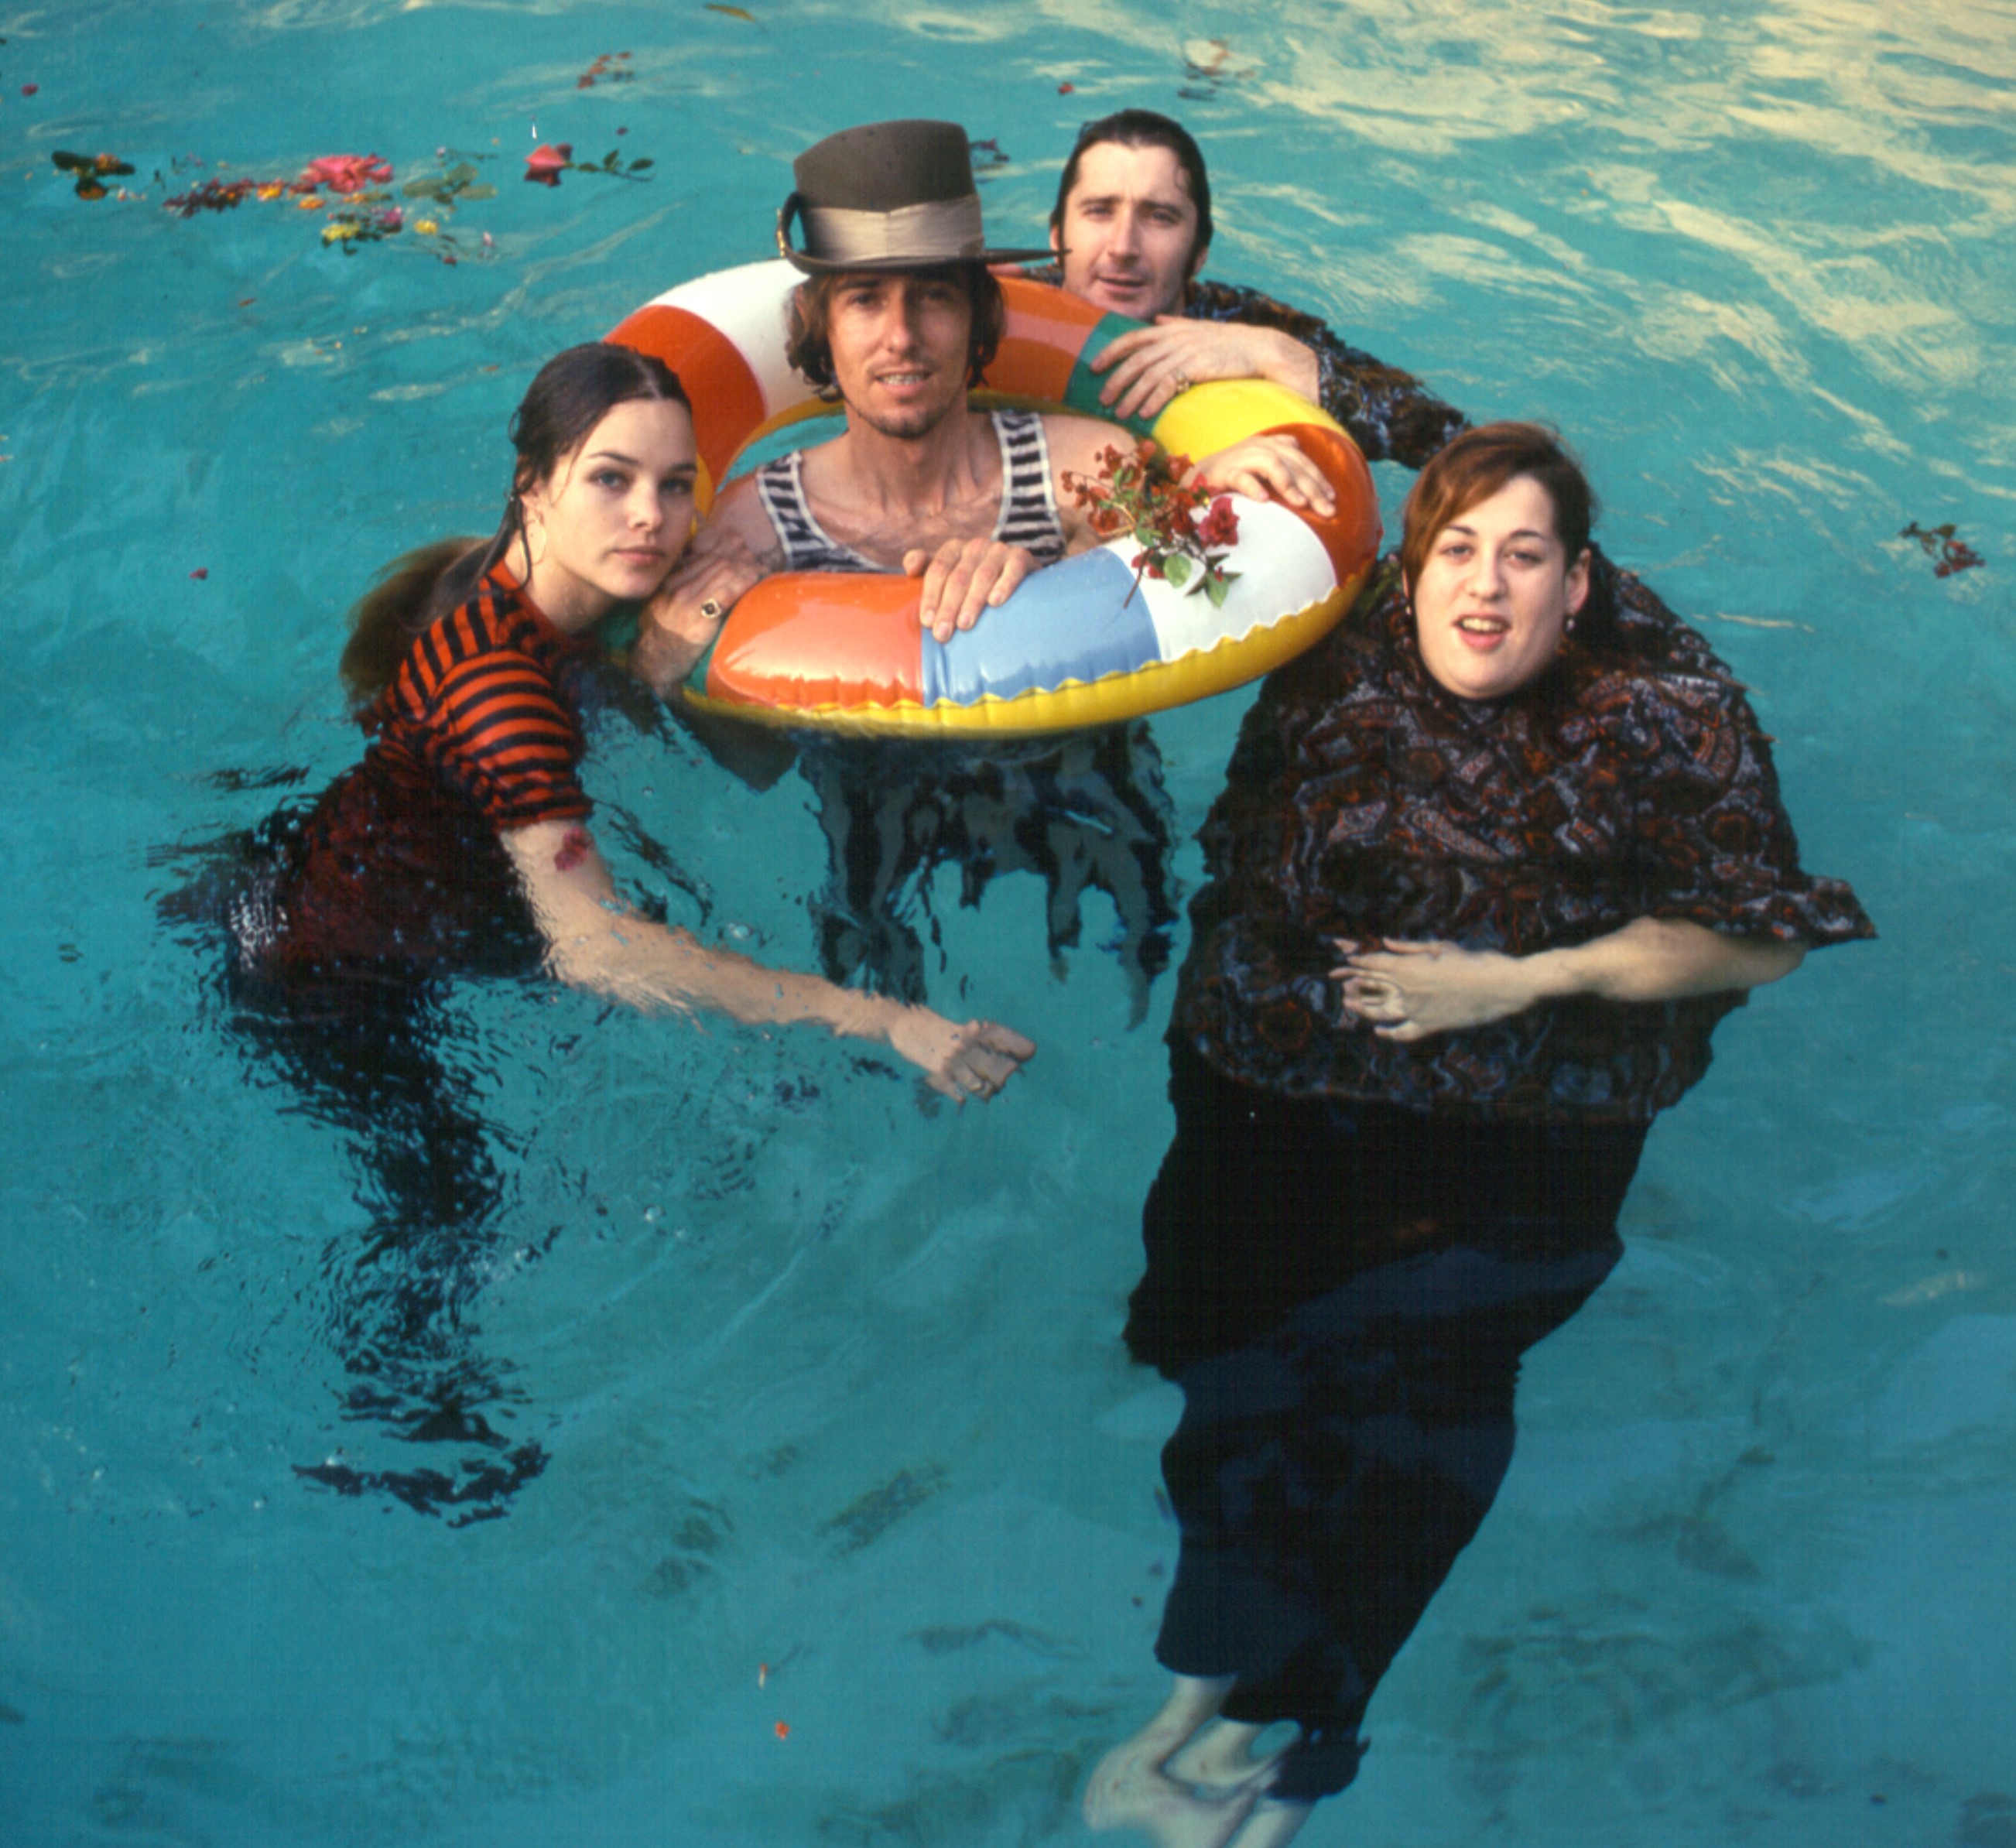 The Mamas & the Papas in a pool